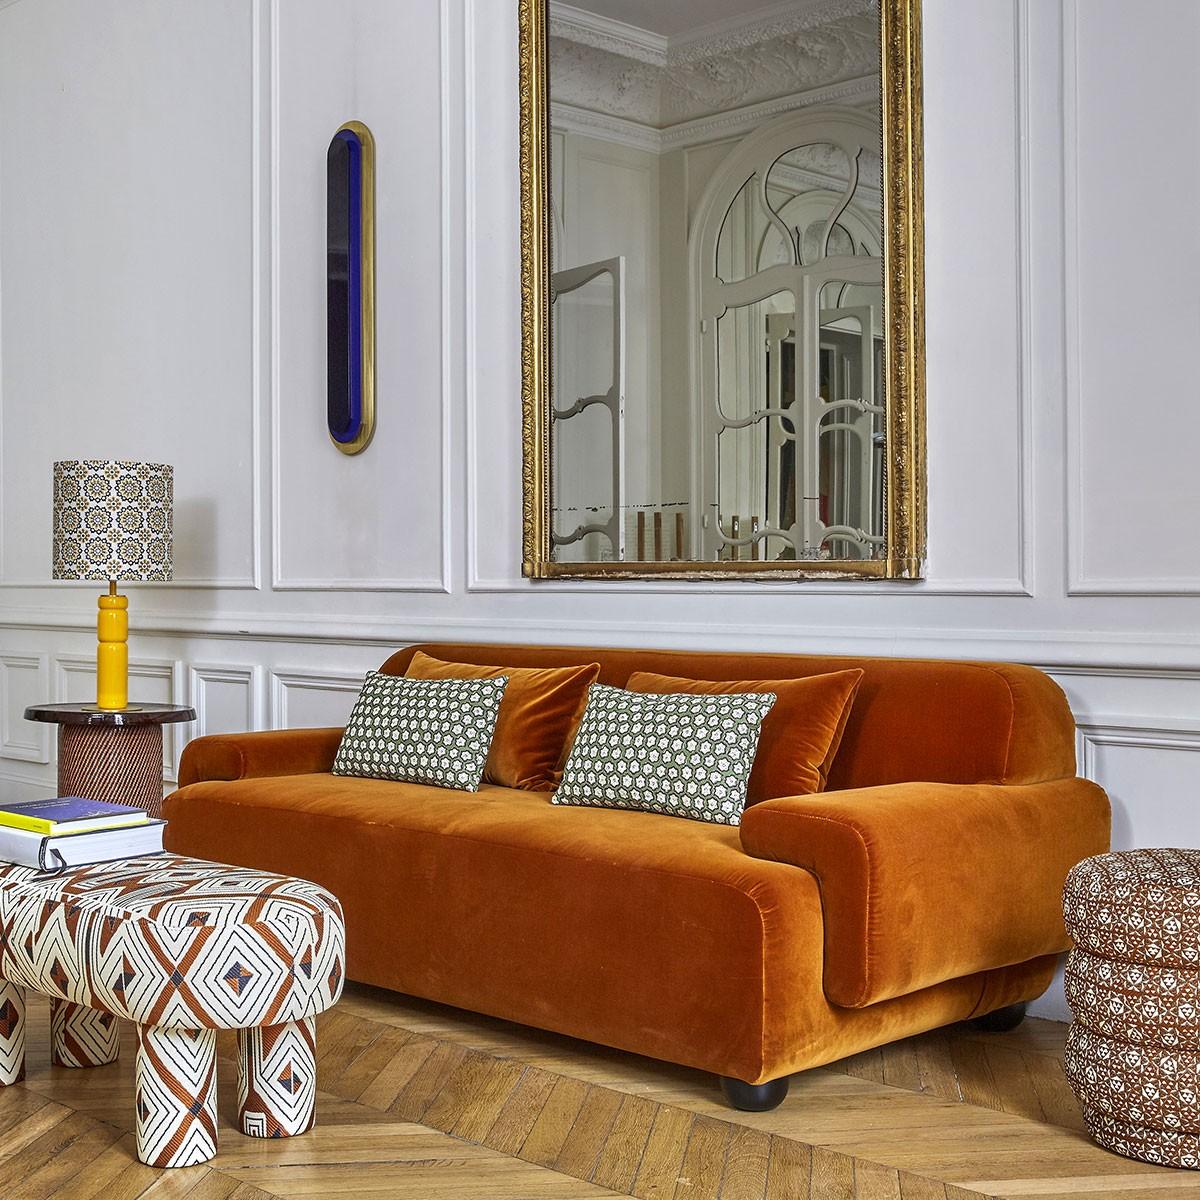 Popus Editions lena 4 seater sofa in saffron antwerp linen upholstery

It looks like it's straight out of a movie, with its generous curves and wide armrests. It is a real invitation to spend long Sundays with the family, comfortably seated in